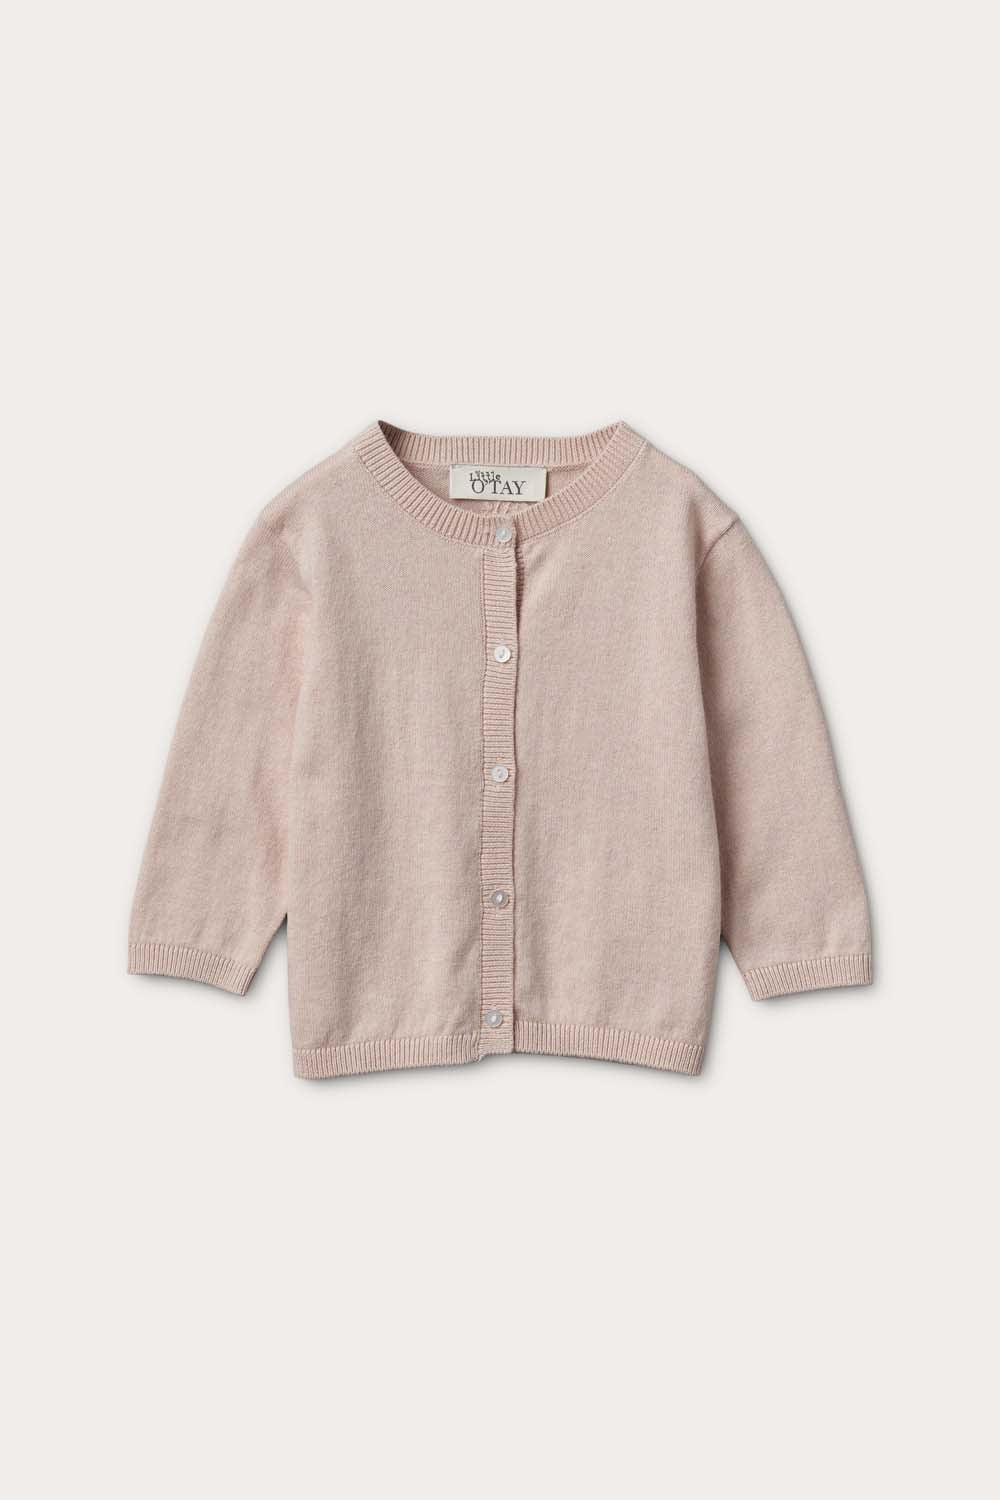 Little O'TAY Atlas Cardigan Solid Cardigans Baby Rose